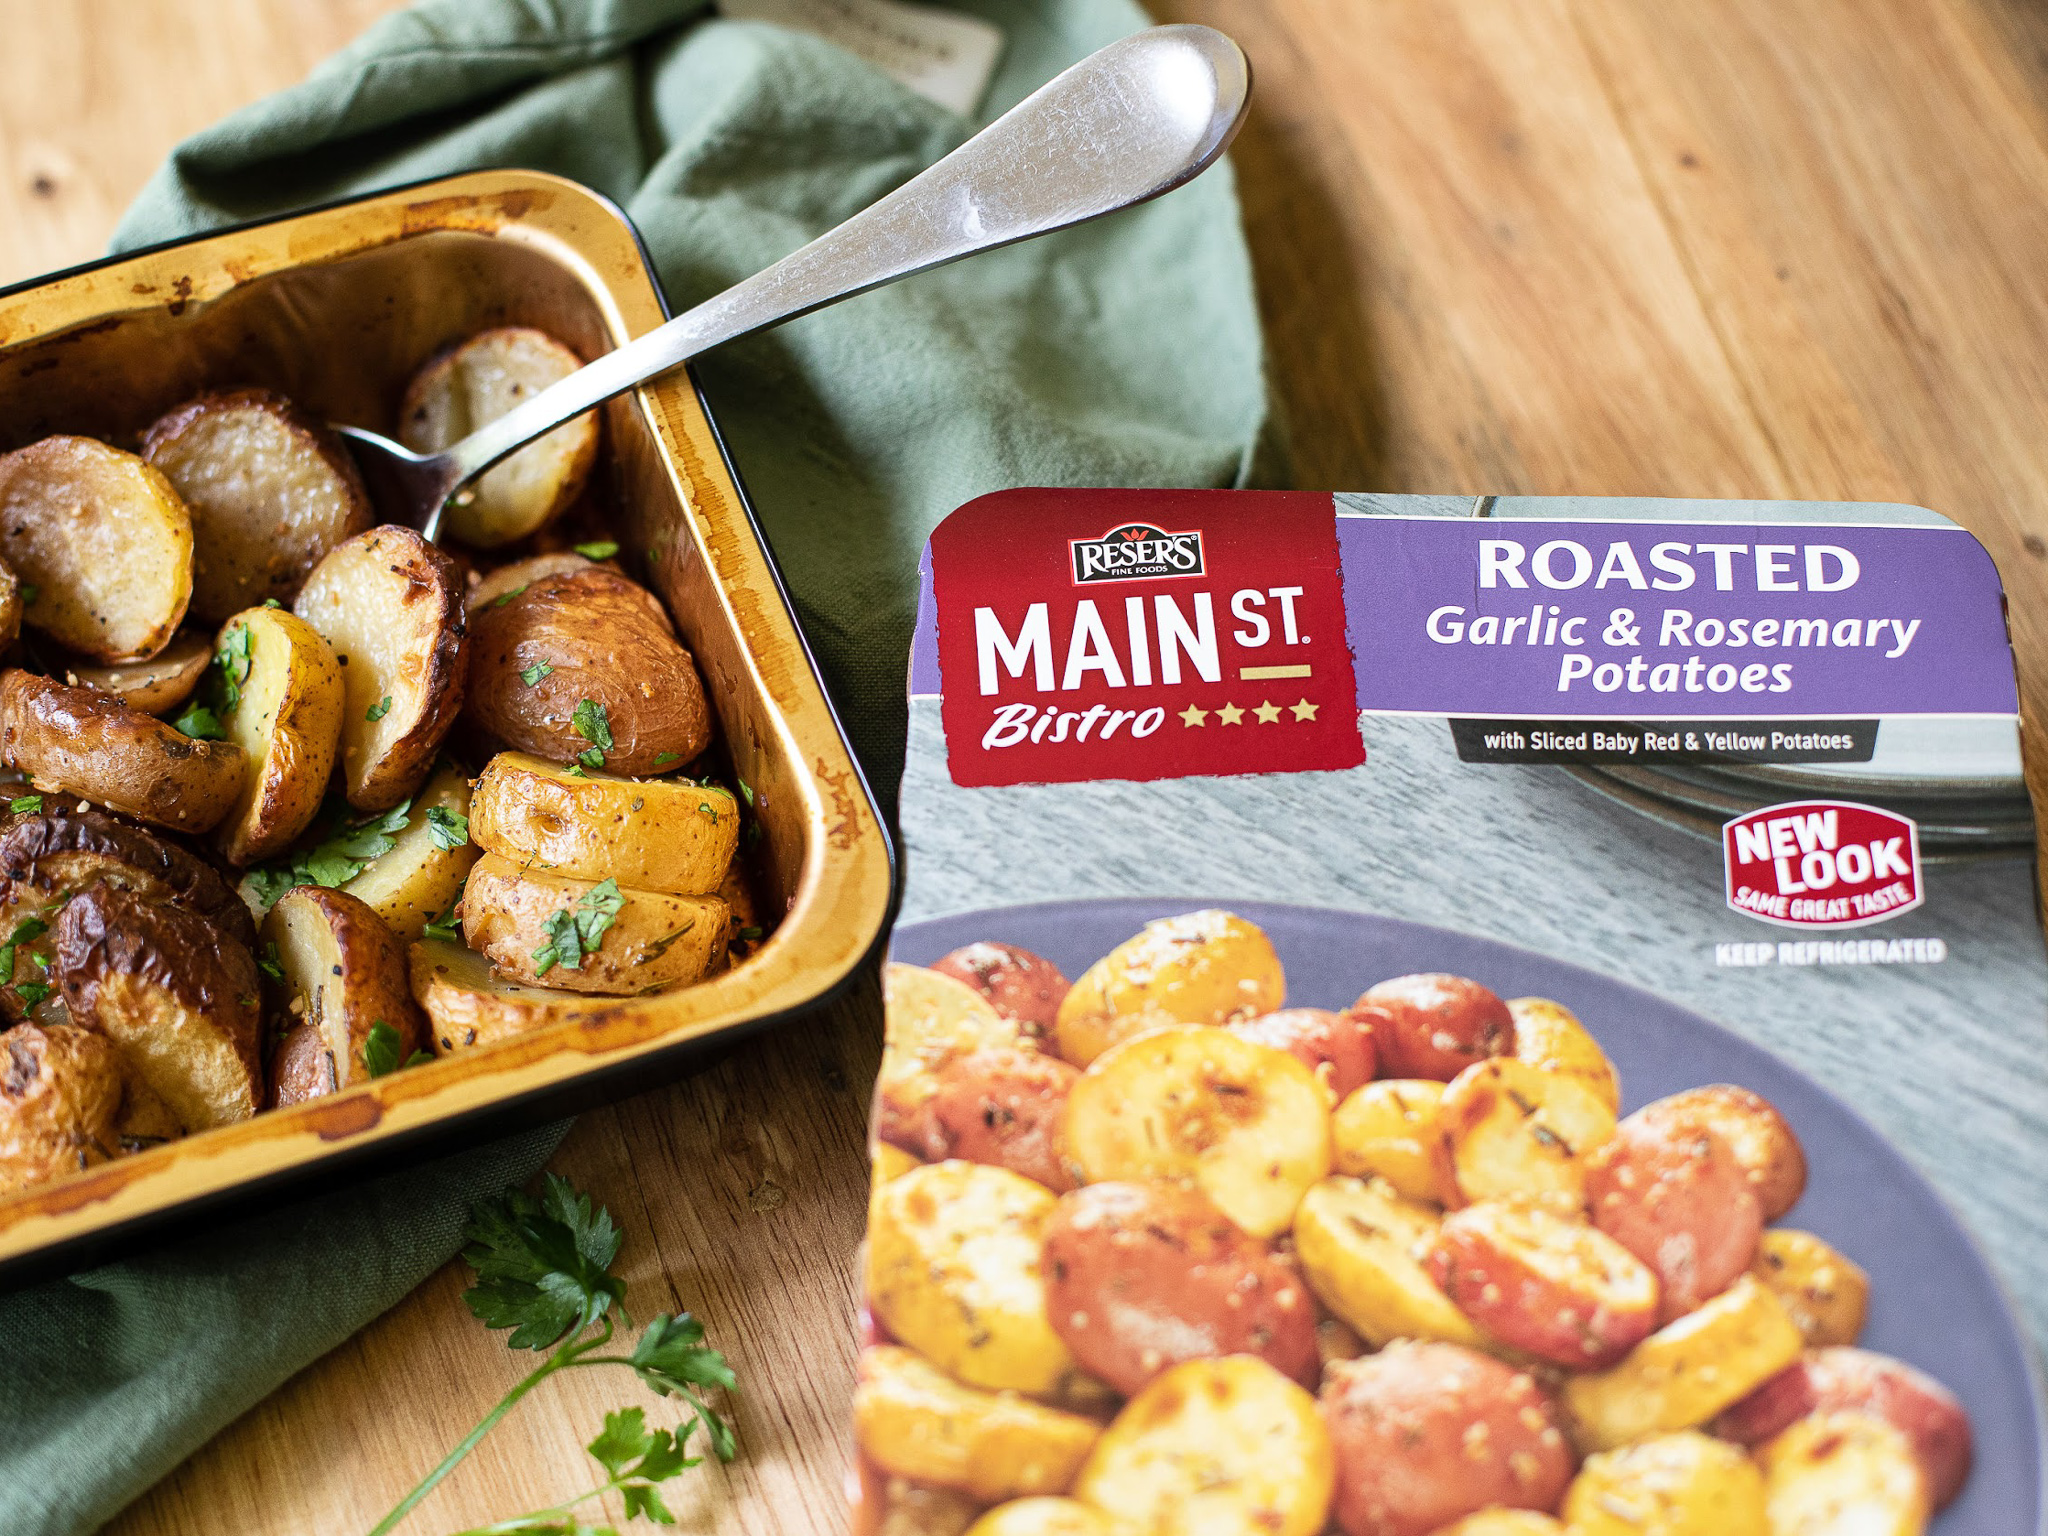 Reser’s Main St. Bistro Classic Sides Family Size or Baked Sides Just $3 At Publix